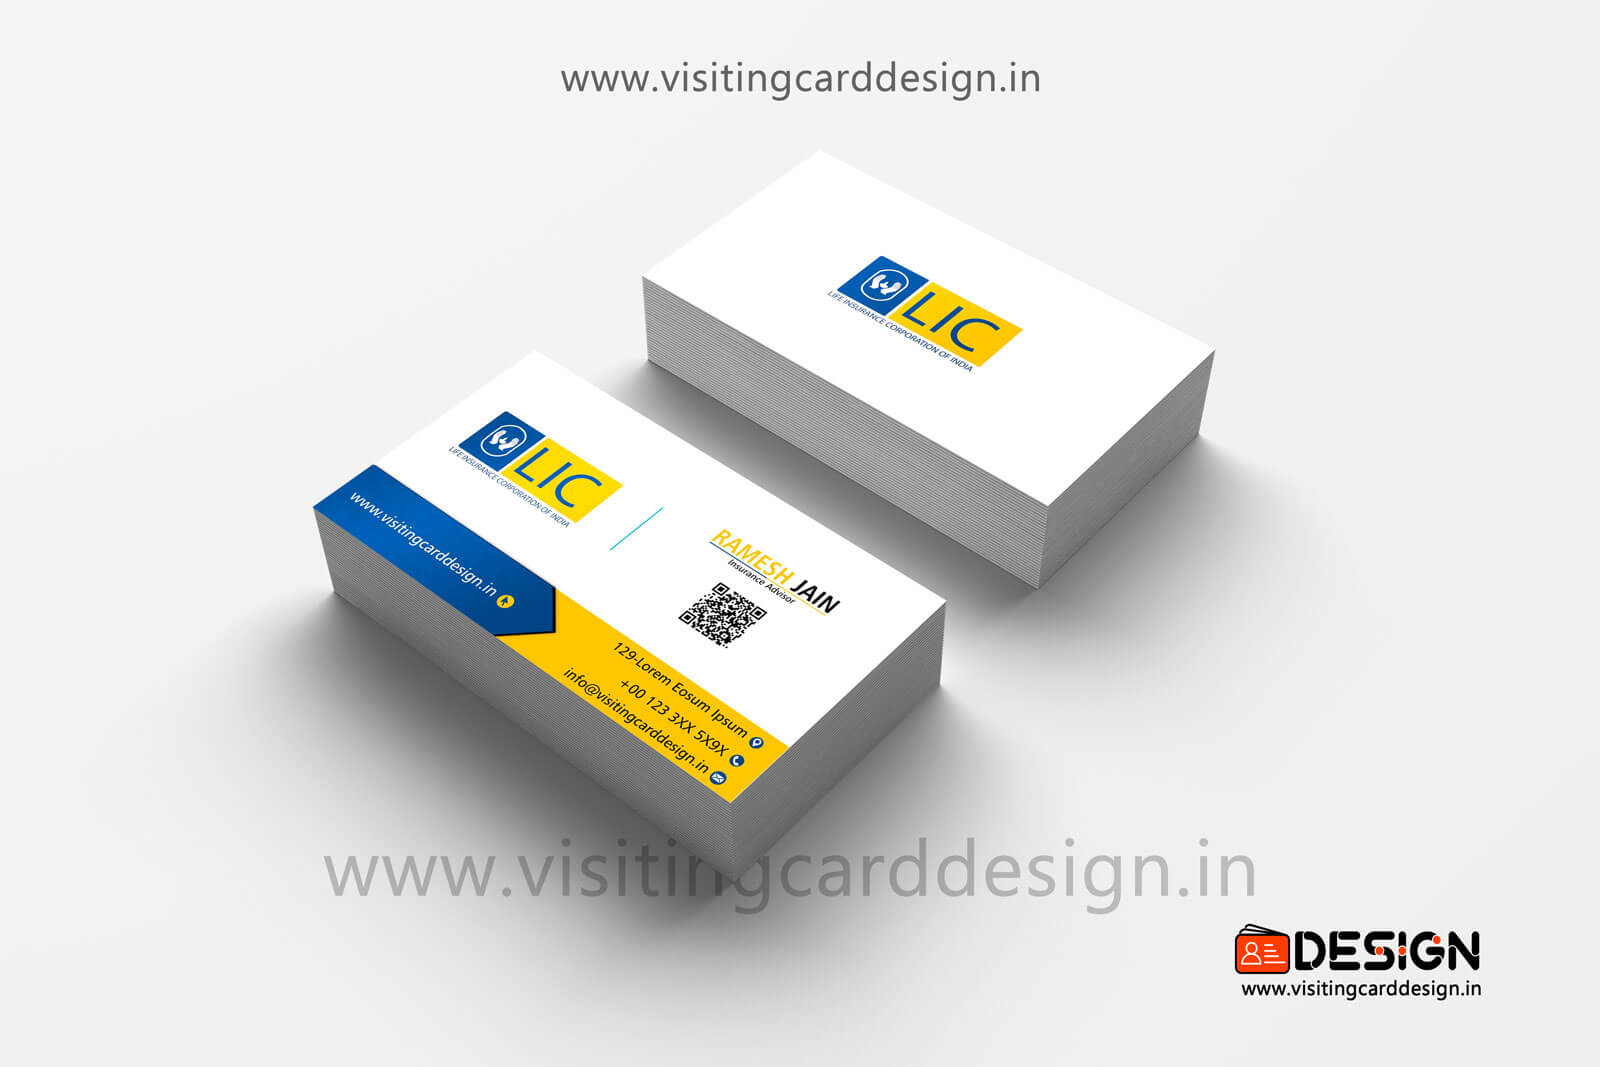 lic-visiting-cards-design-in-cdr-free-download-2021